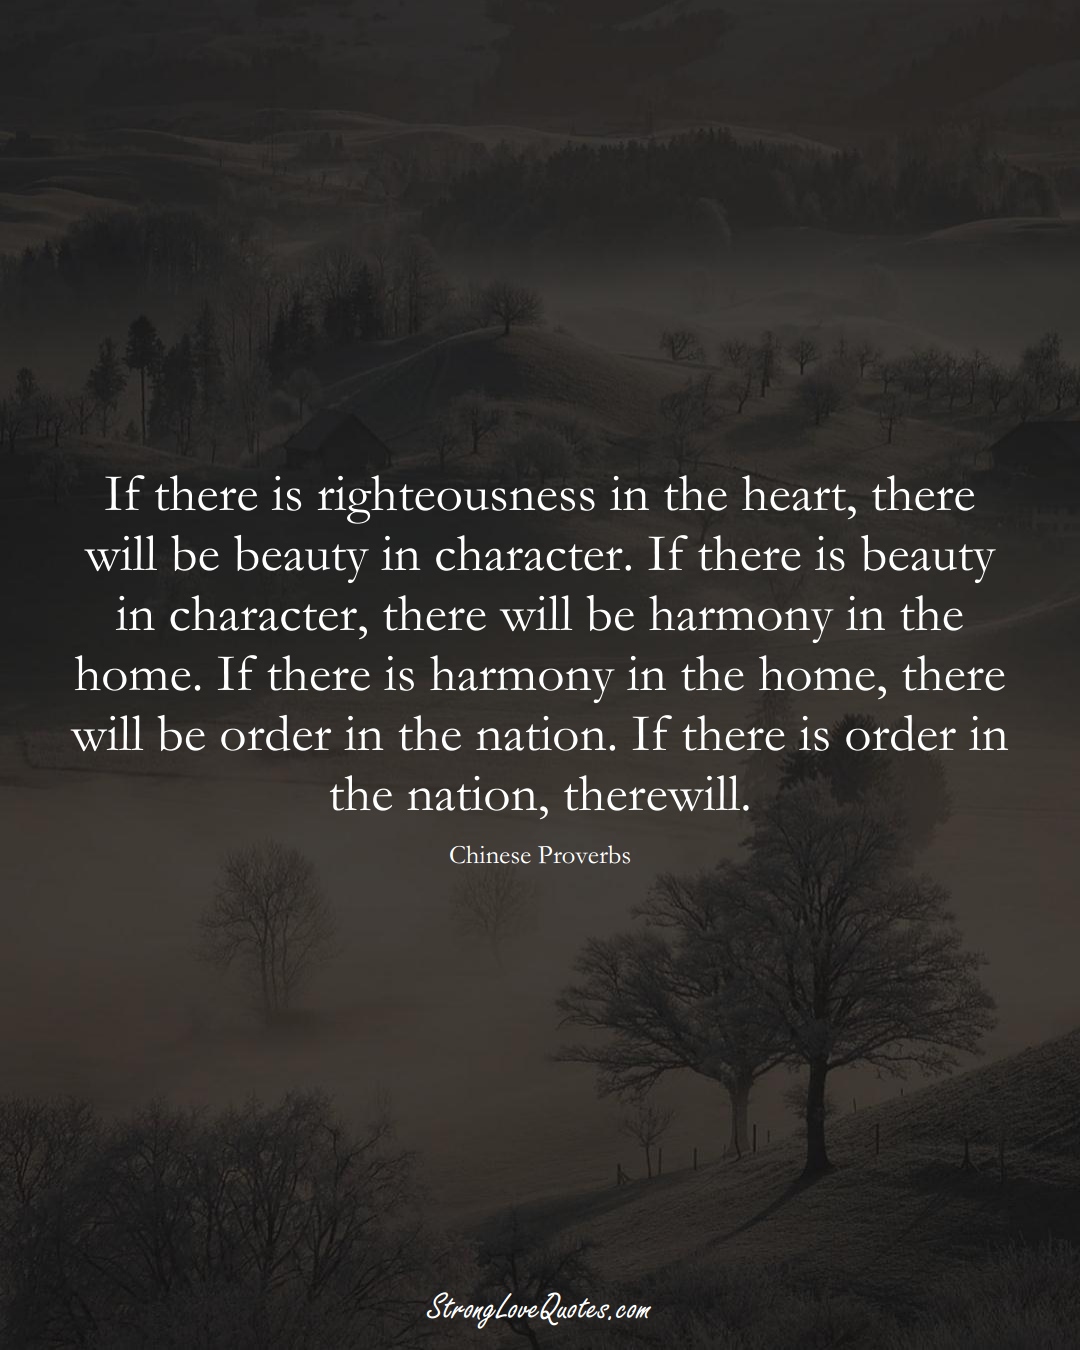 If there is righteousness in the heart, there will be beauty in character. If there is beauty in character, there will be harmony in the home. If there is harmony in the home, there will be order in the nation. If there is order in the nation, there will. (Chinese Sayings);  #AsianSayings